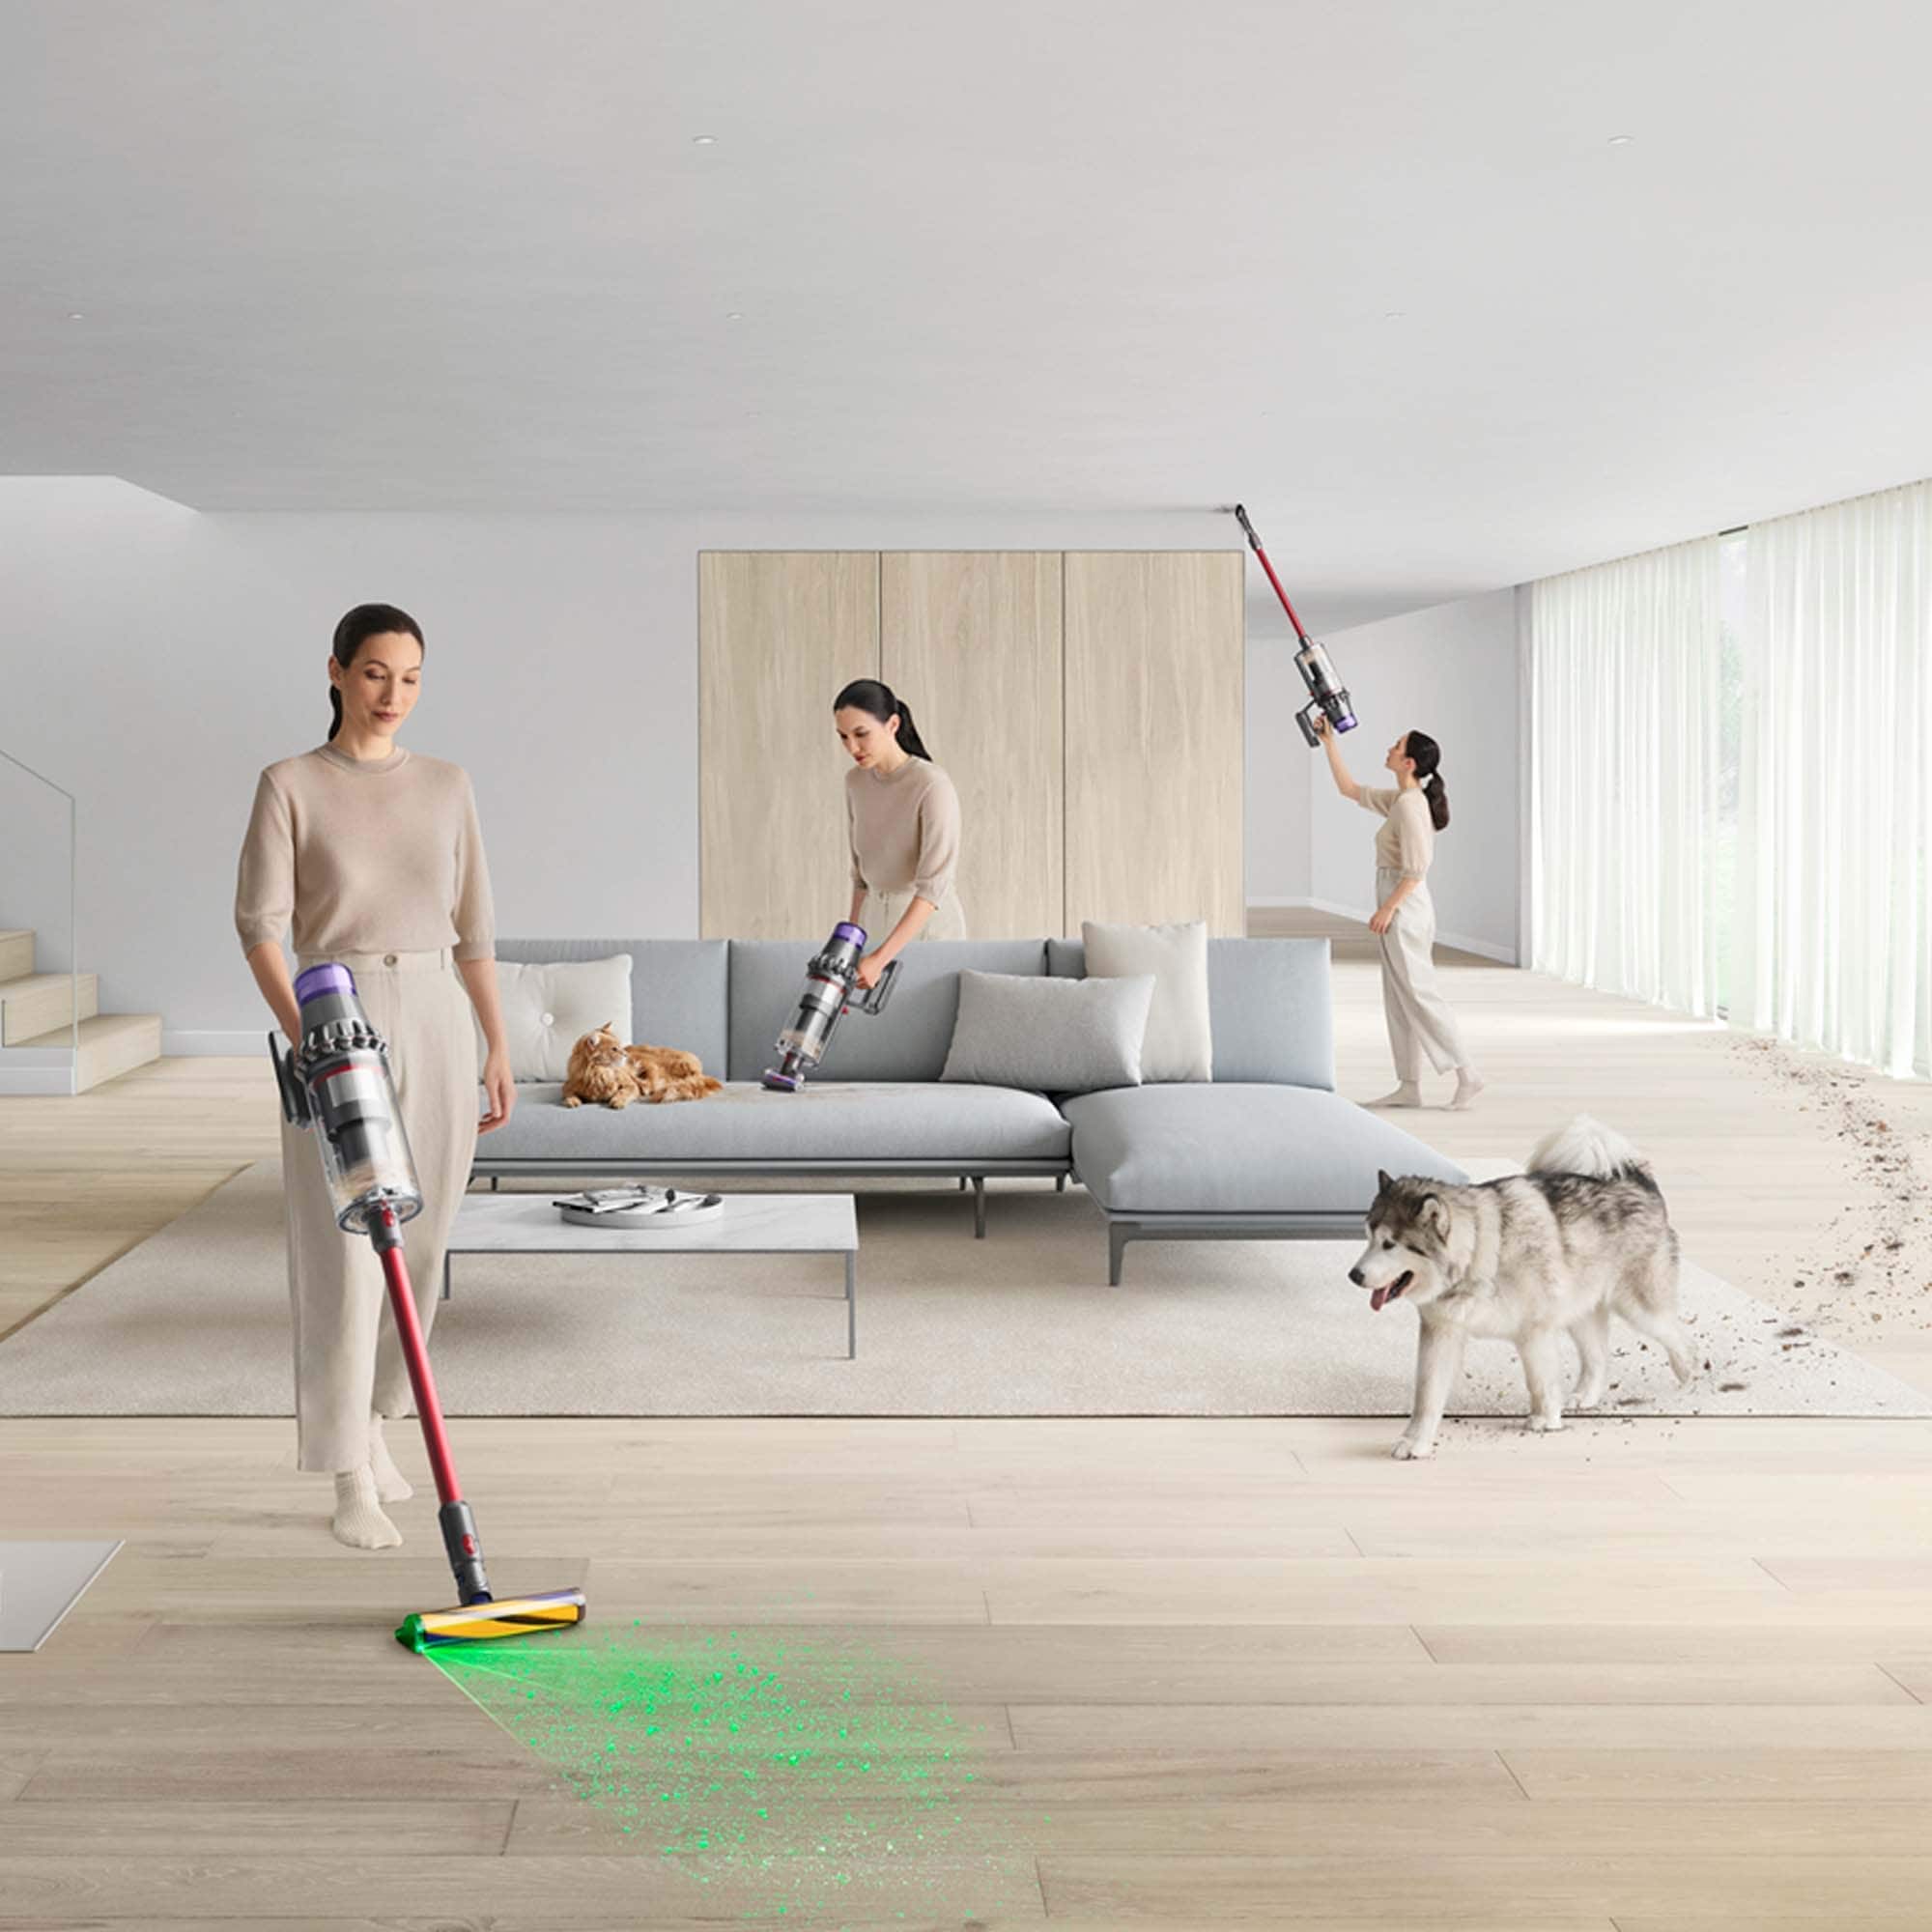 https://ak1.ostkcdn.com/images/products/is/images/direct/a7a49833bb67f07b1768d1e3a2b6857c2a4dc3da/Dyson-V12-Detect-Slim-Cordless-Vacuum-Cleaner.jpg